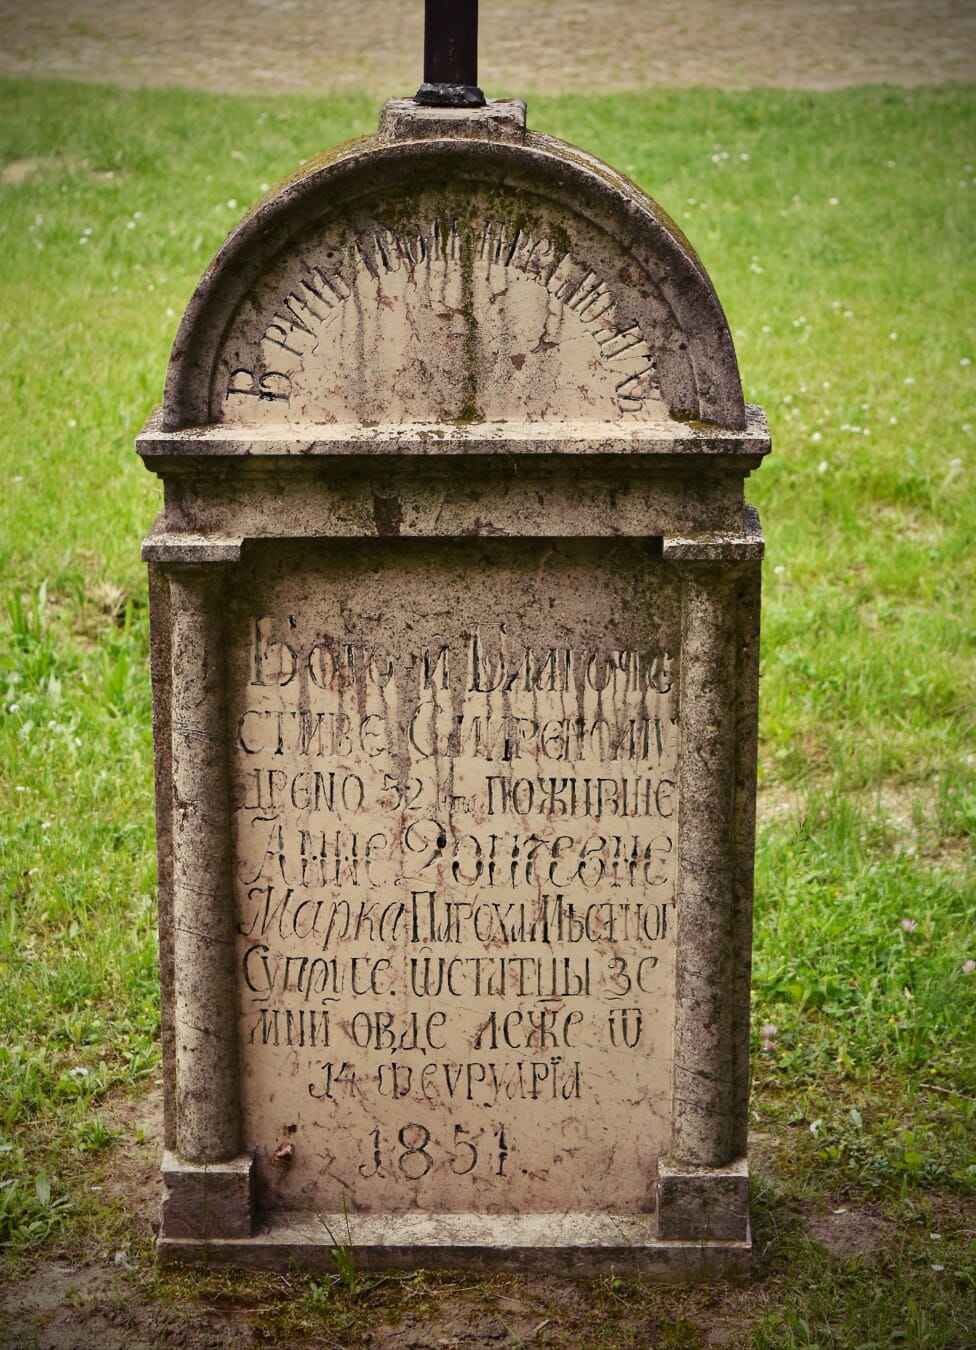 burial, grave, gravestone, tombstone, cemetery, old fashioned, lawn, grass, marble, old